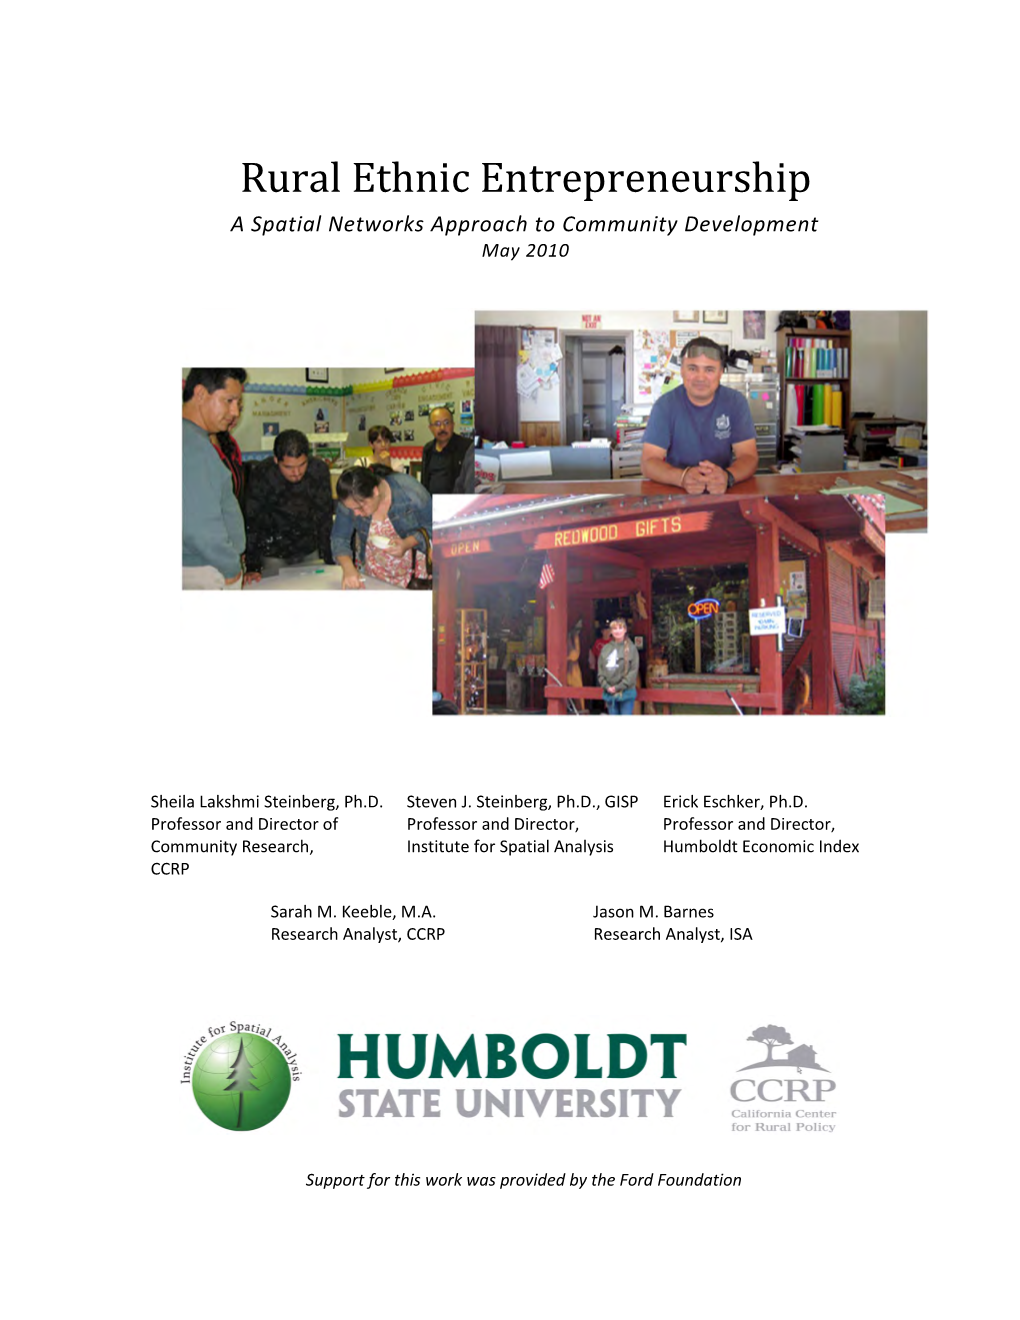 Rural Ethnic Entrepreneurship a Spatial Networks Approach to Community Development May 2010